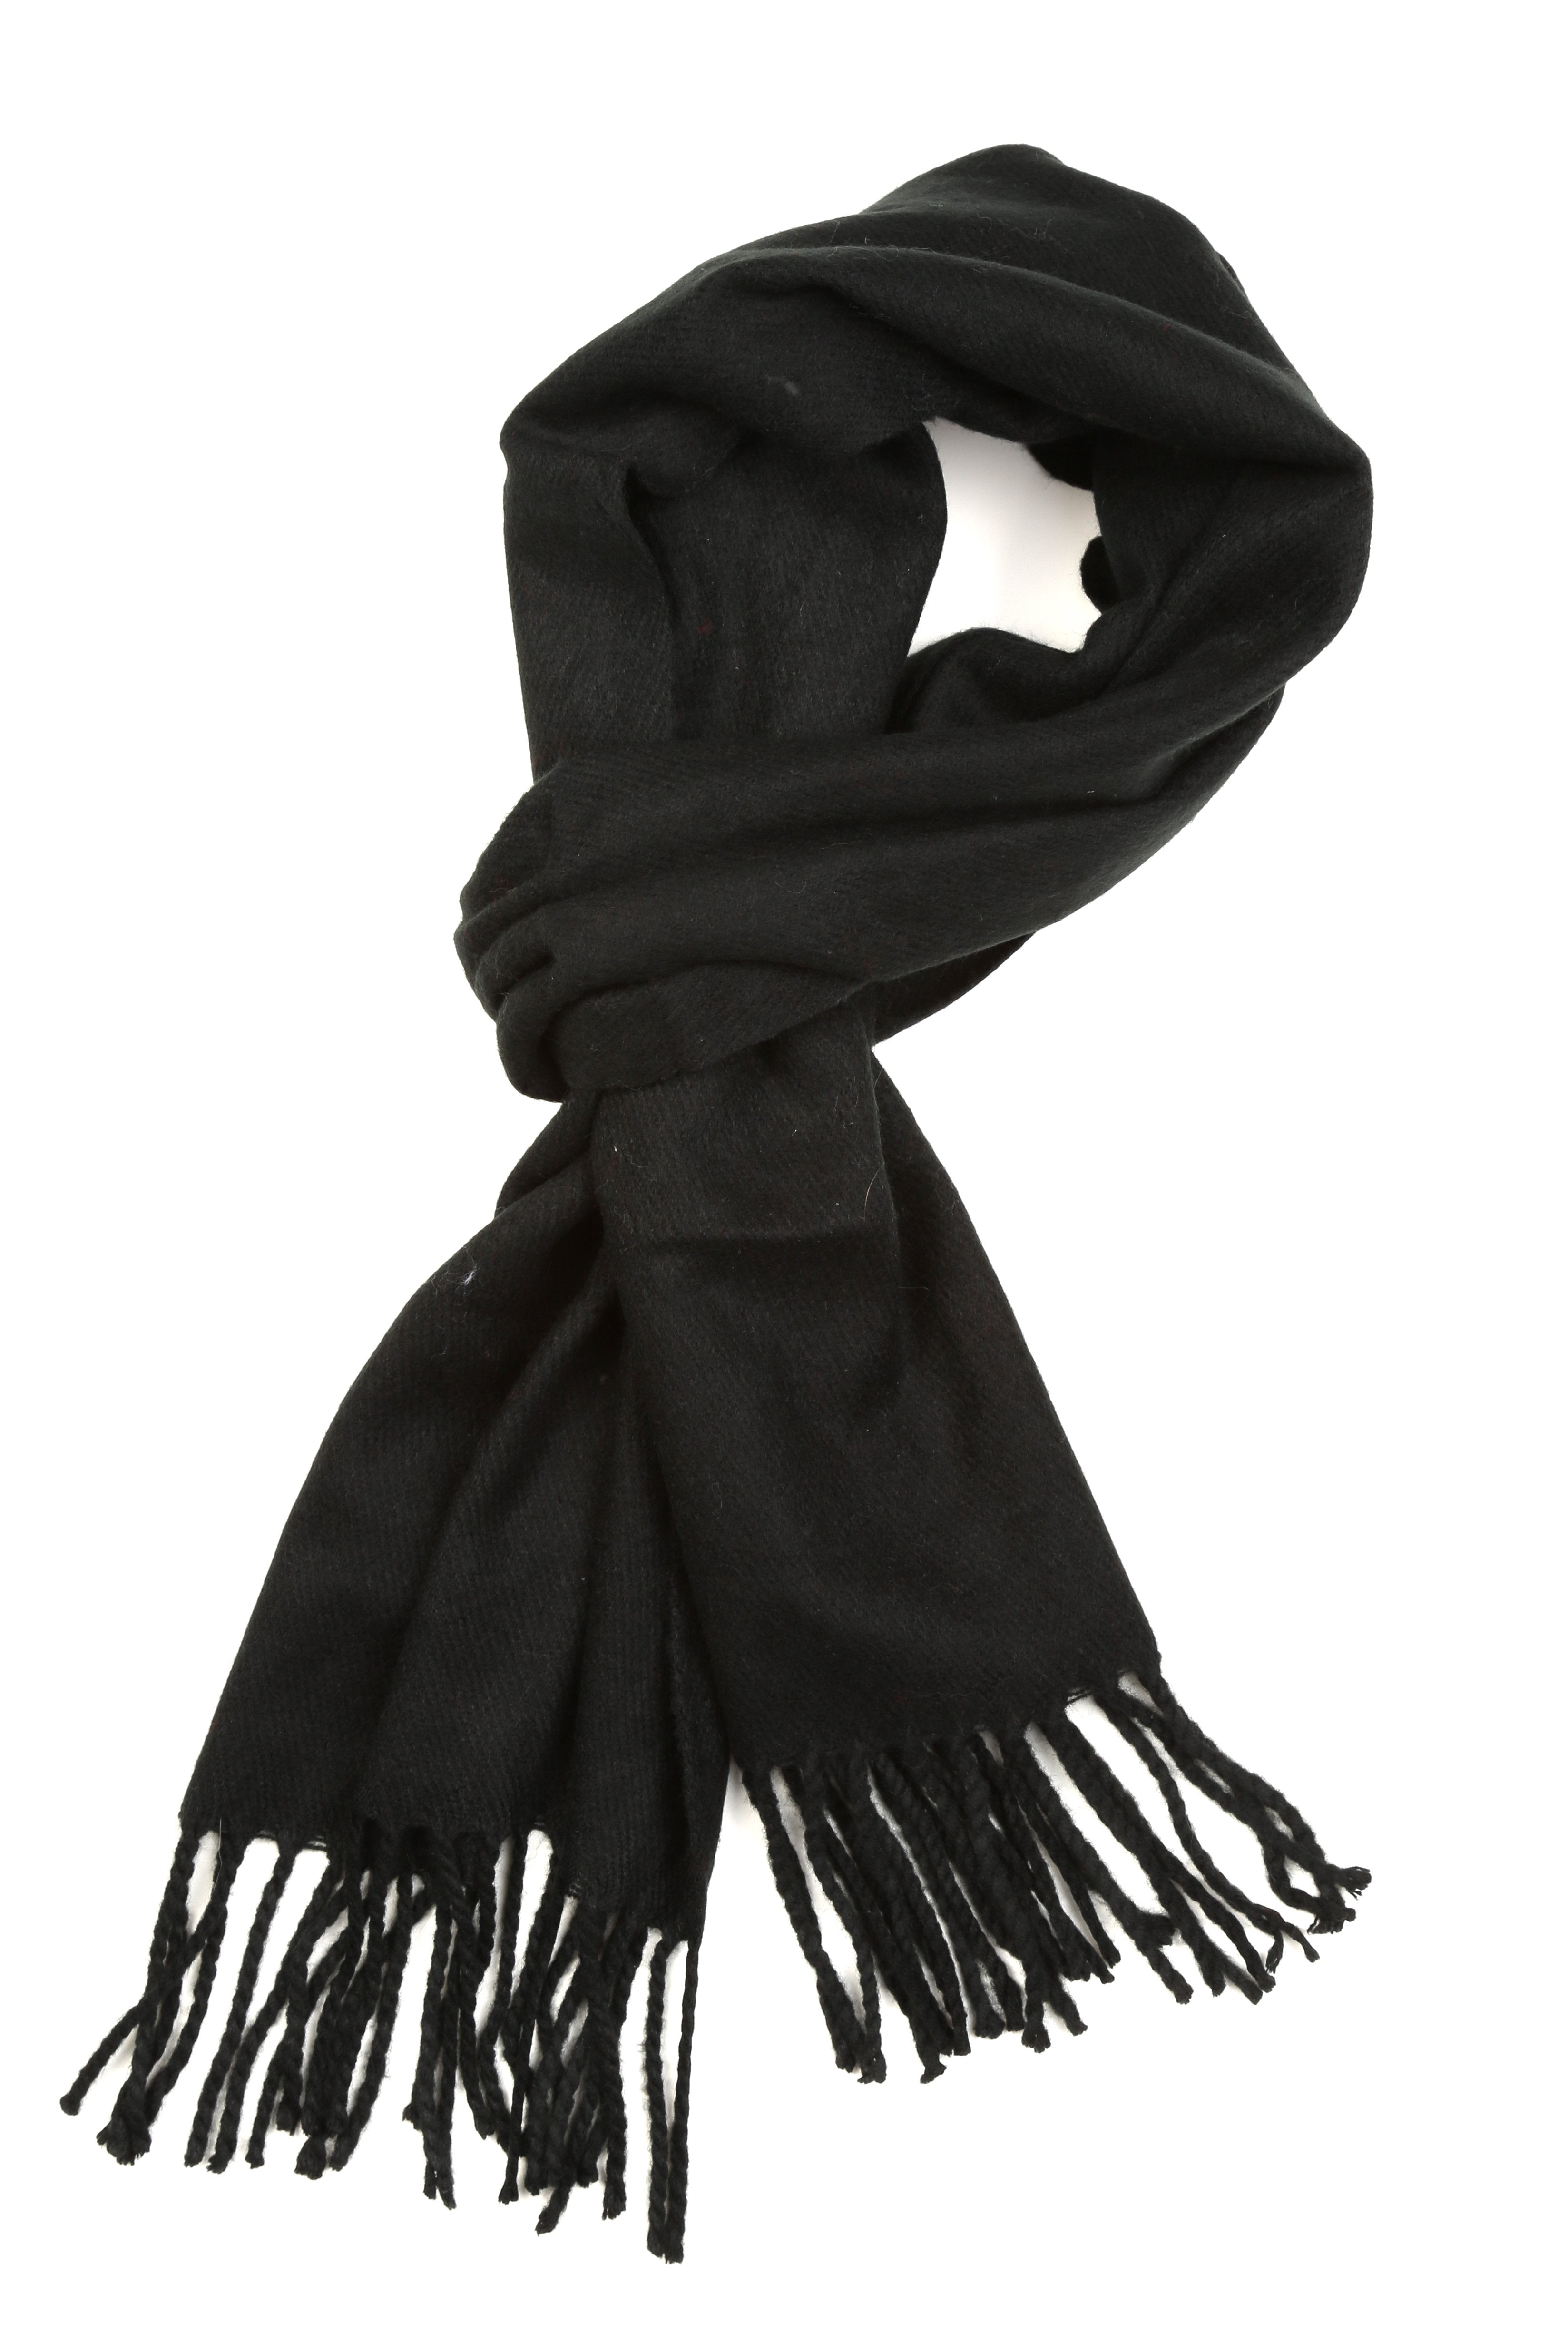 Sakkas Booker Cashmere Feel Solid Colored Unisex Winter Scarf With Fri